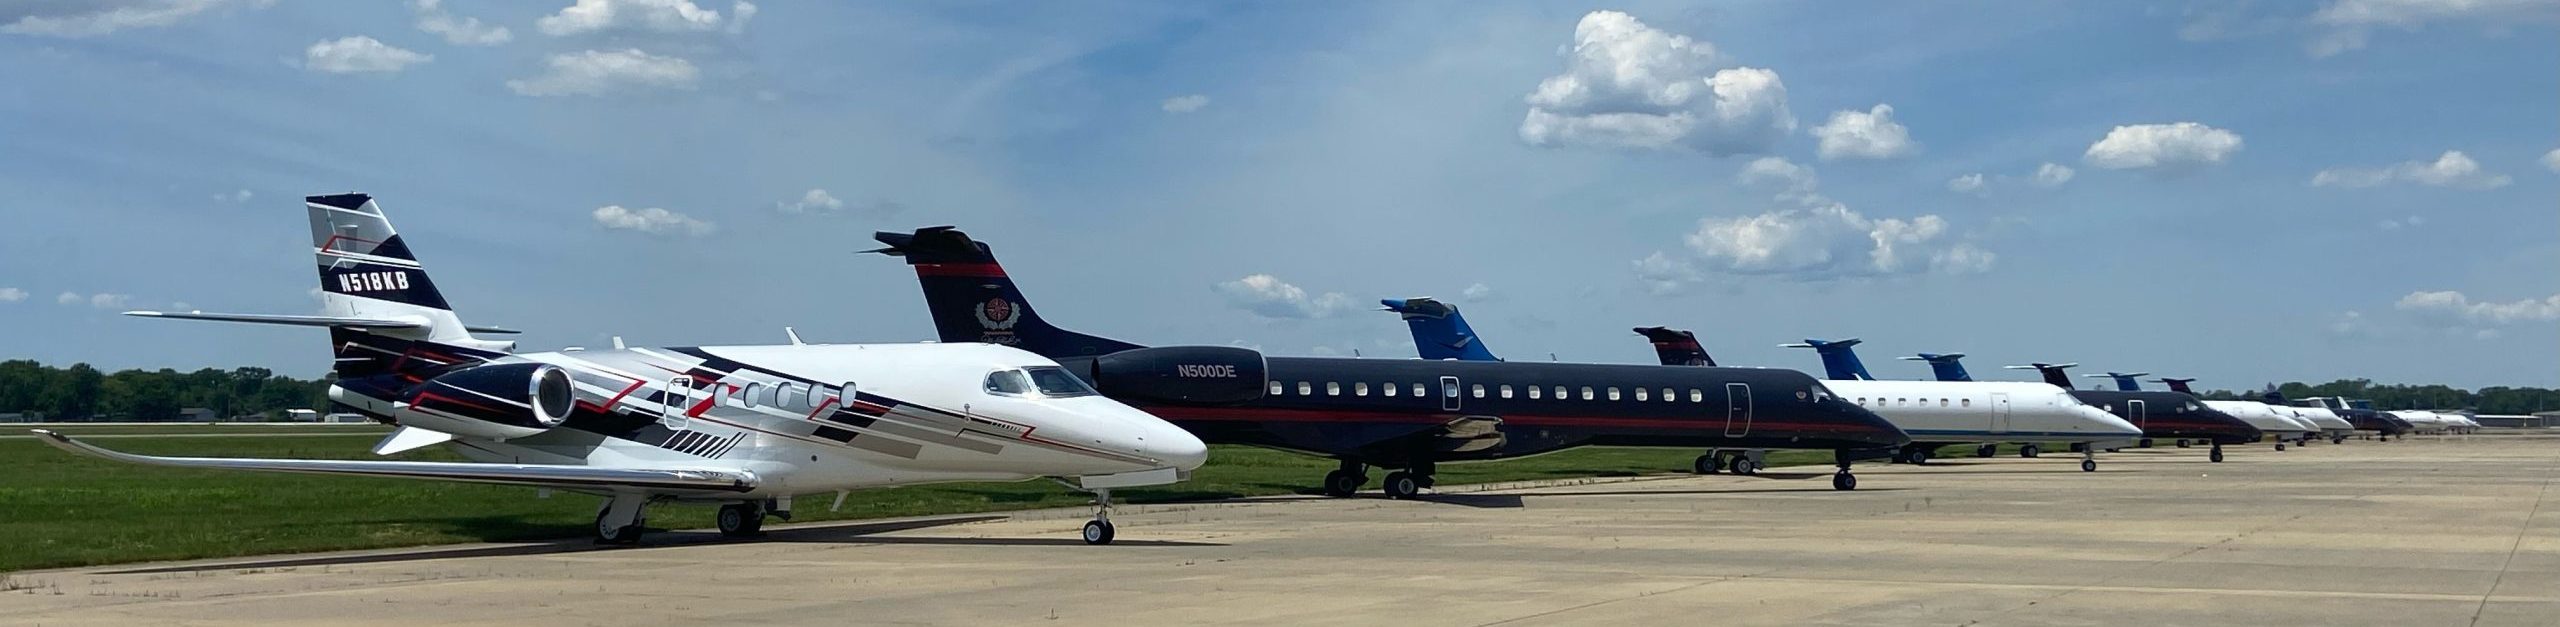 Jets parked on the tarmac at St. Louis Downtown Airport.